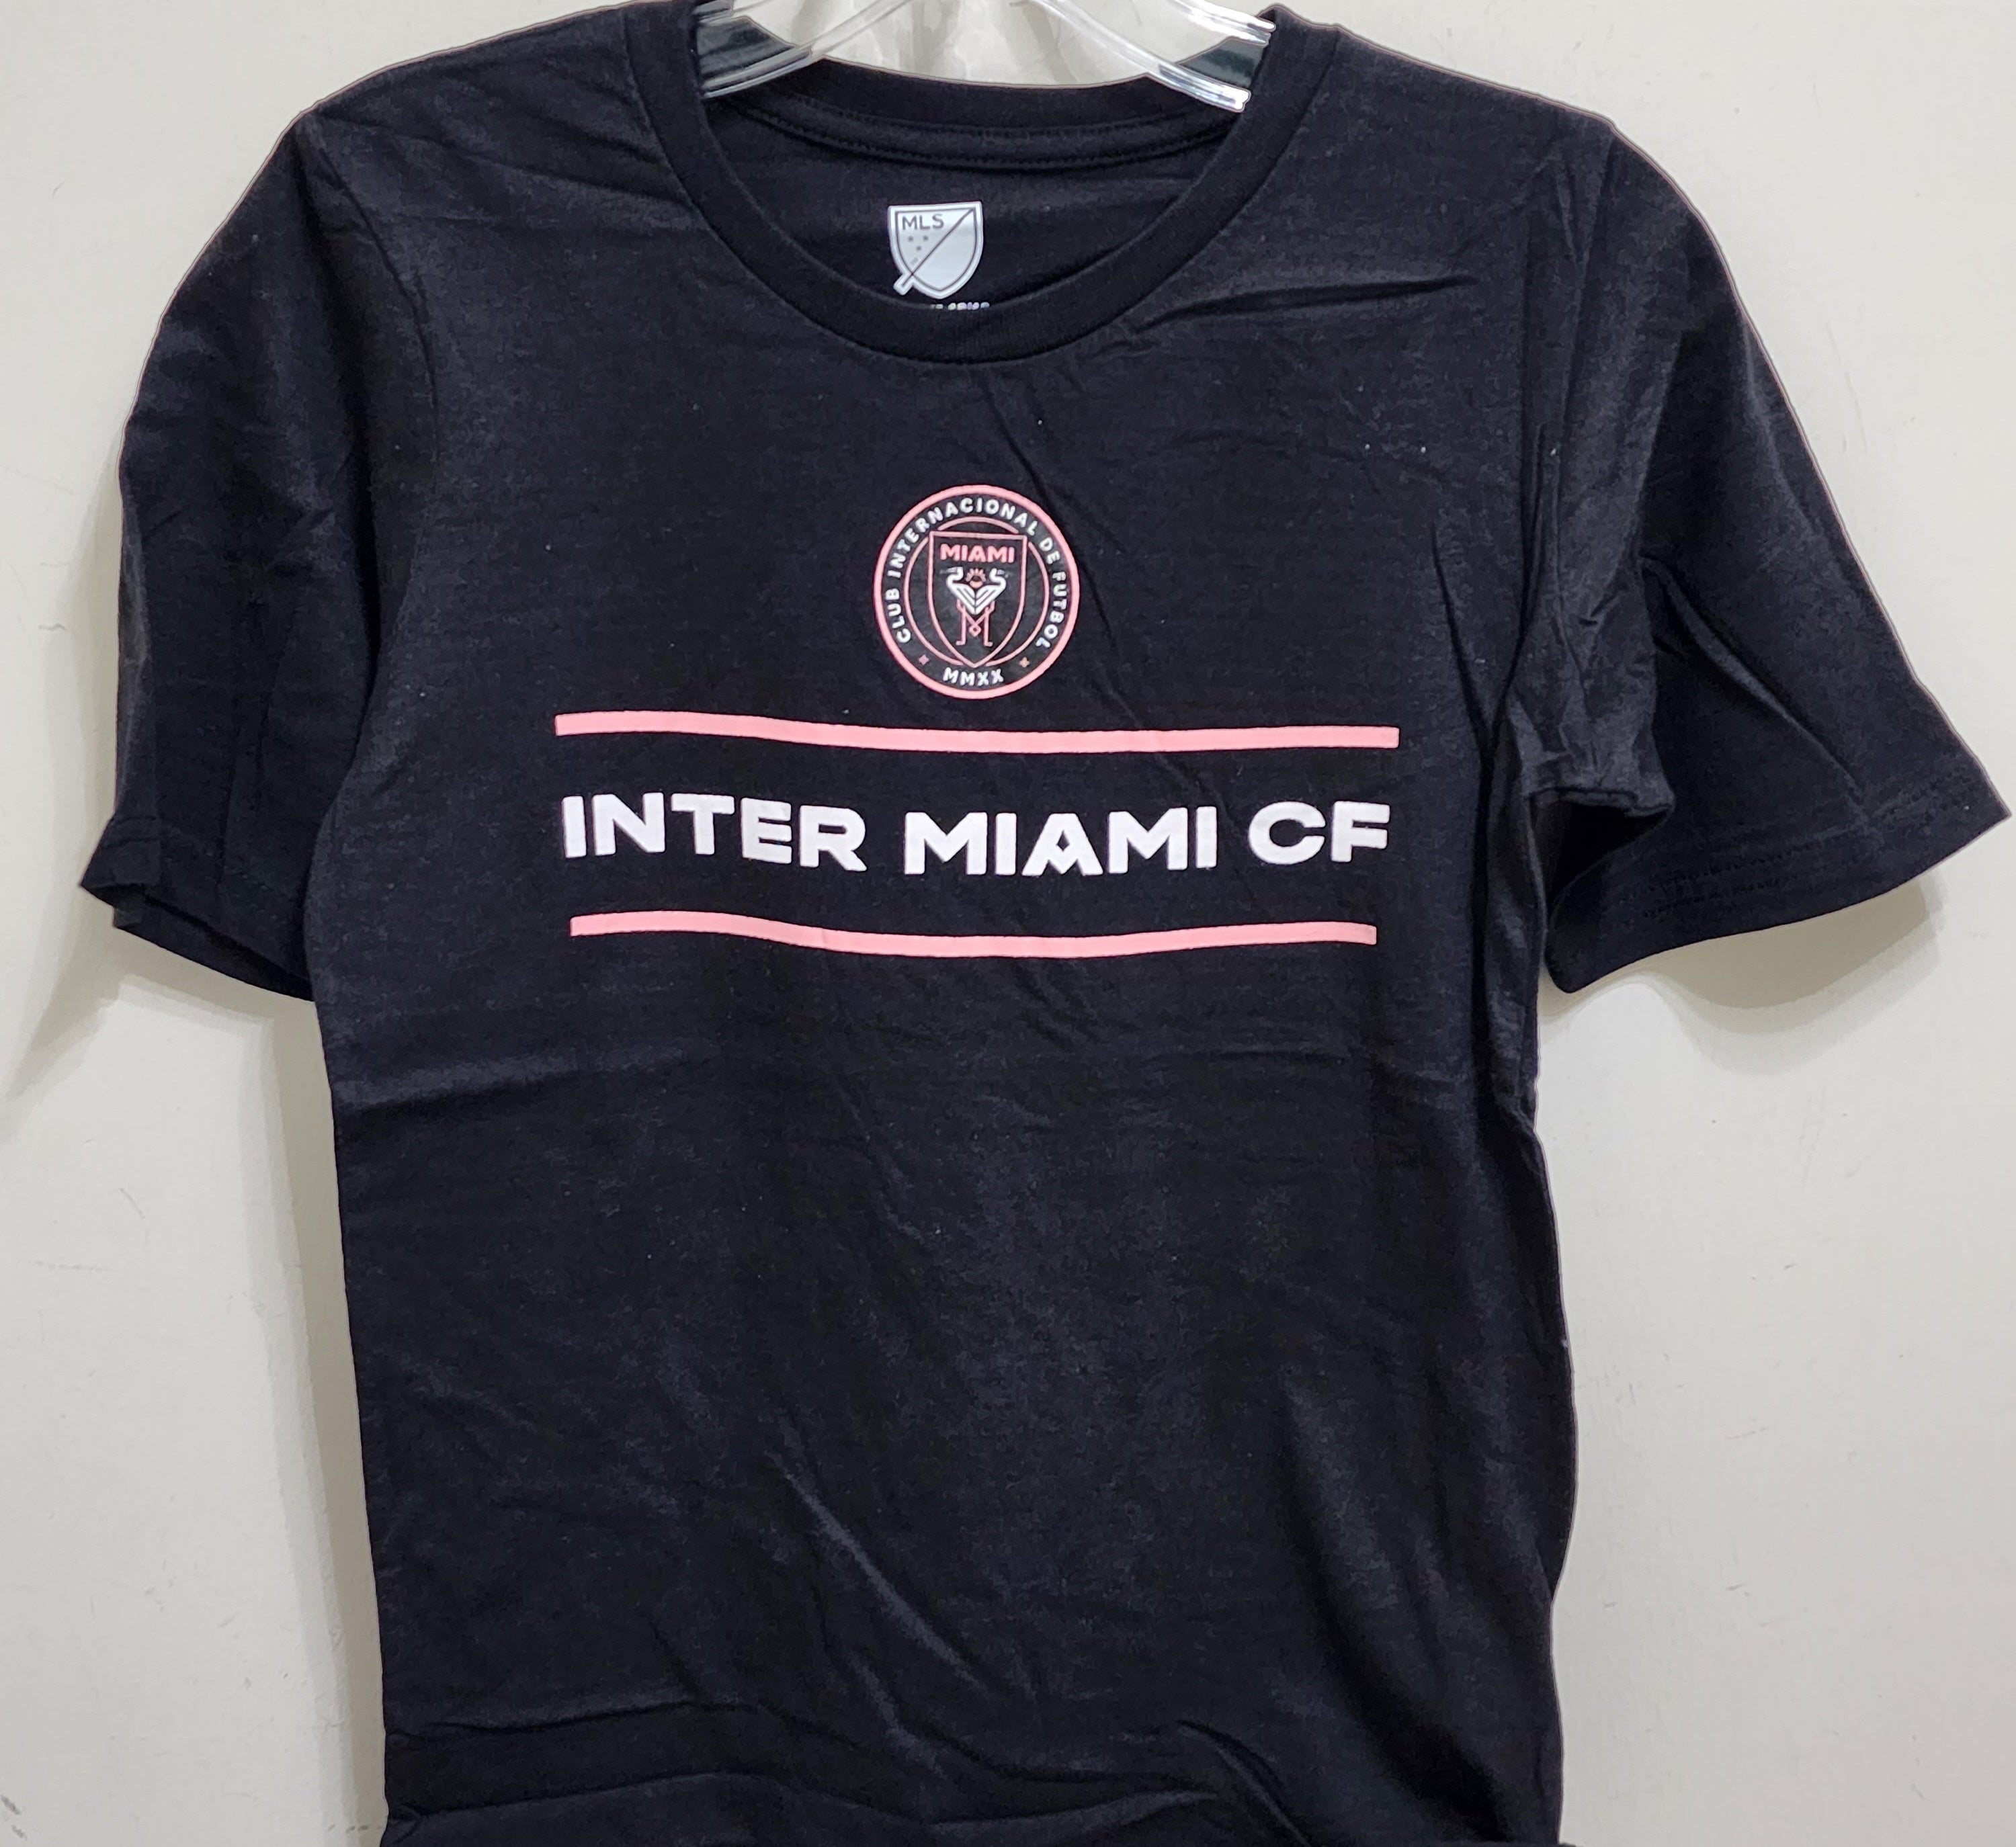 Inter Miami CF Youth In the Pros T-Shirt - Black